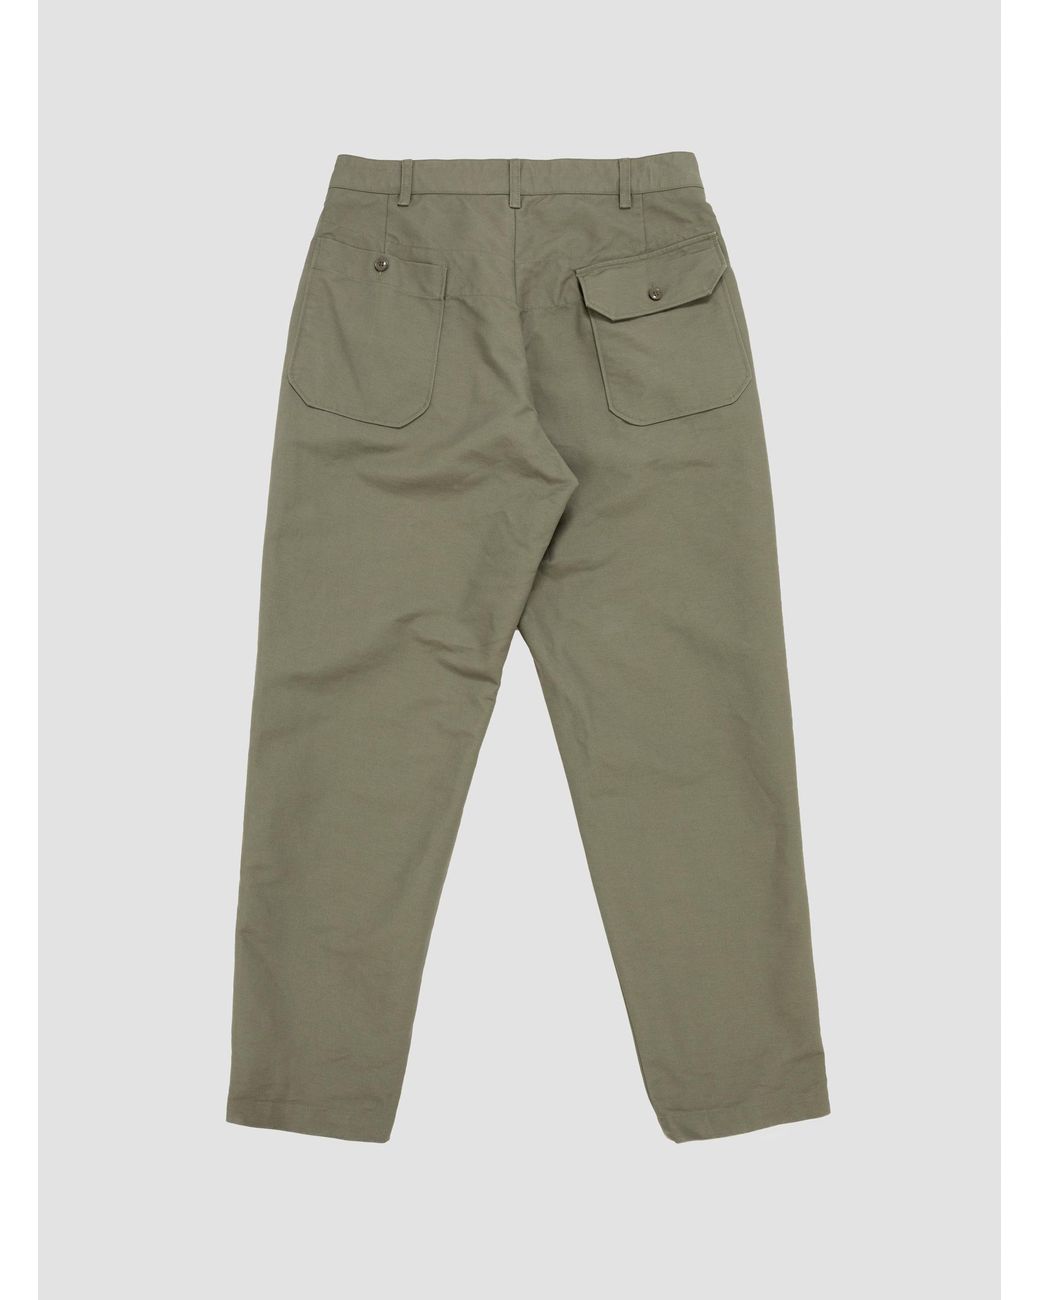 Engineered Garments Men's Green Carlyle Pant Cotton Double Cloth